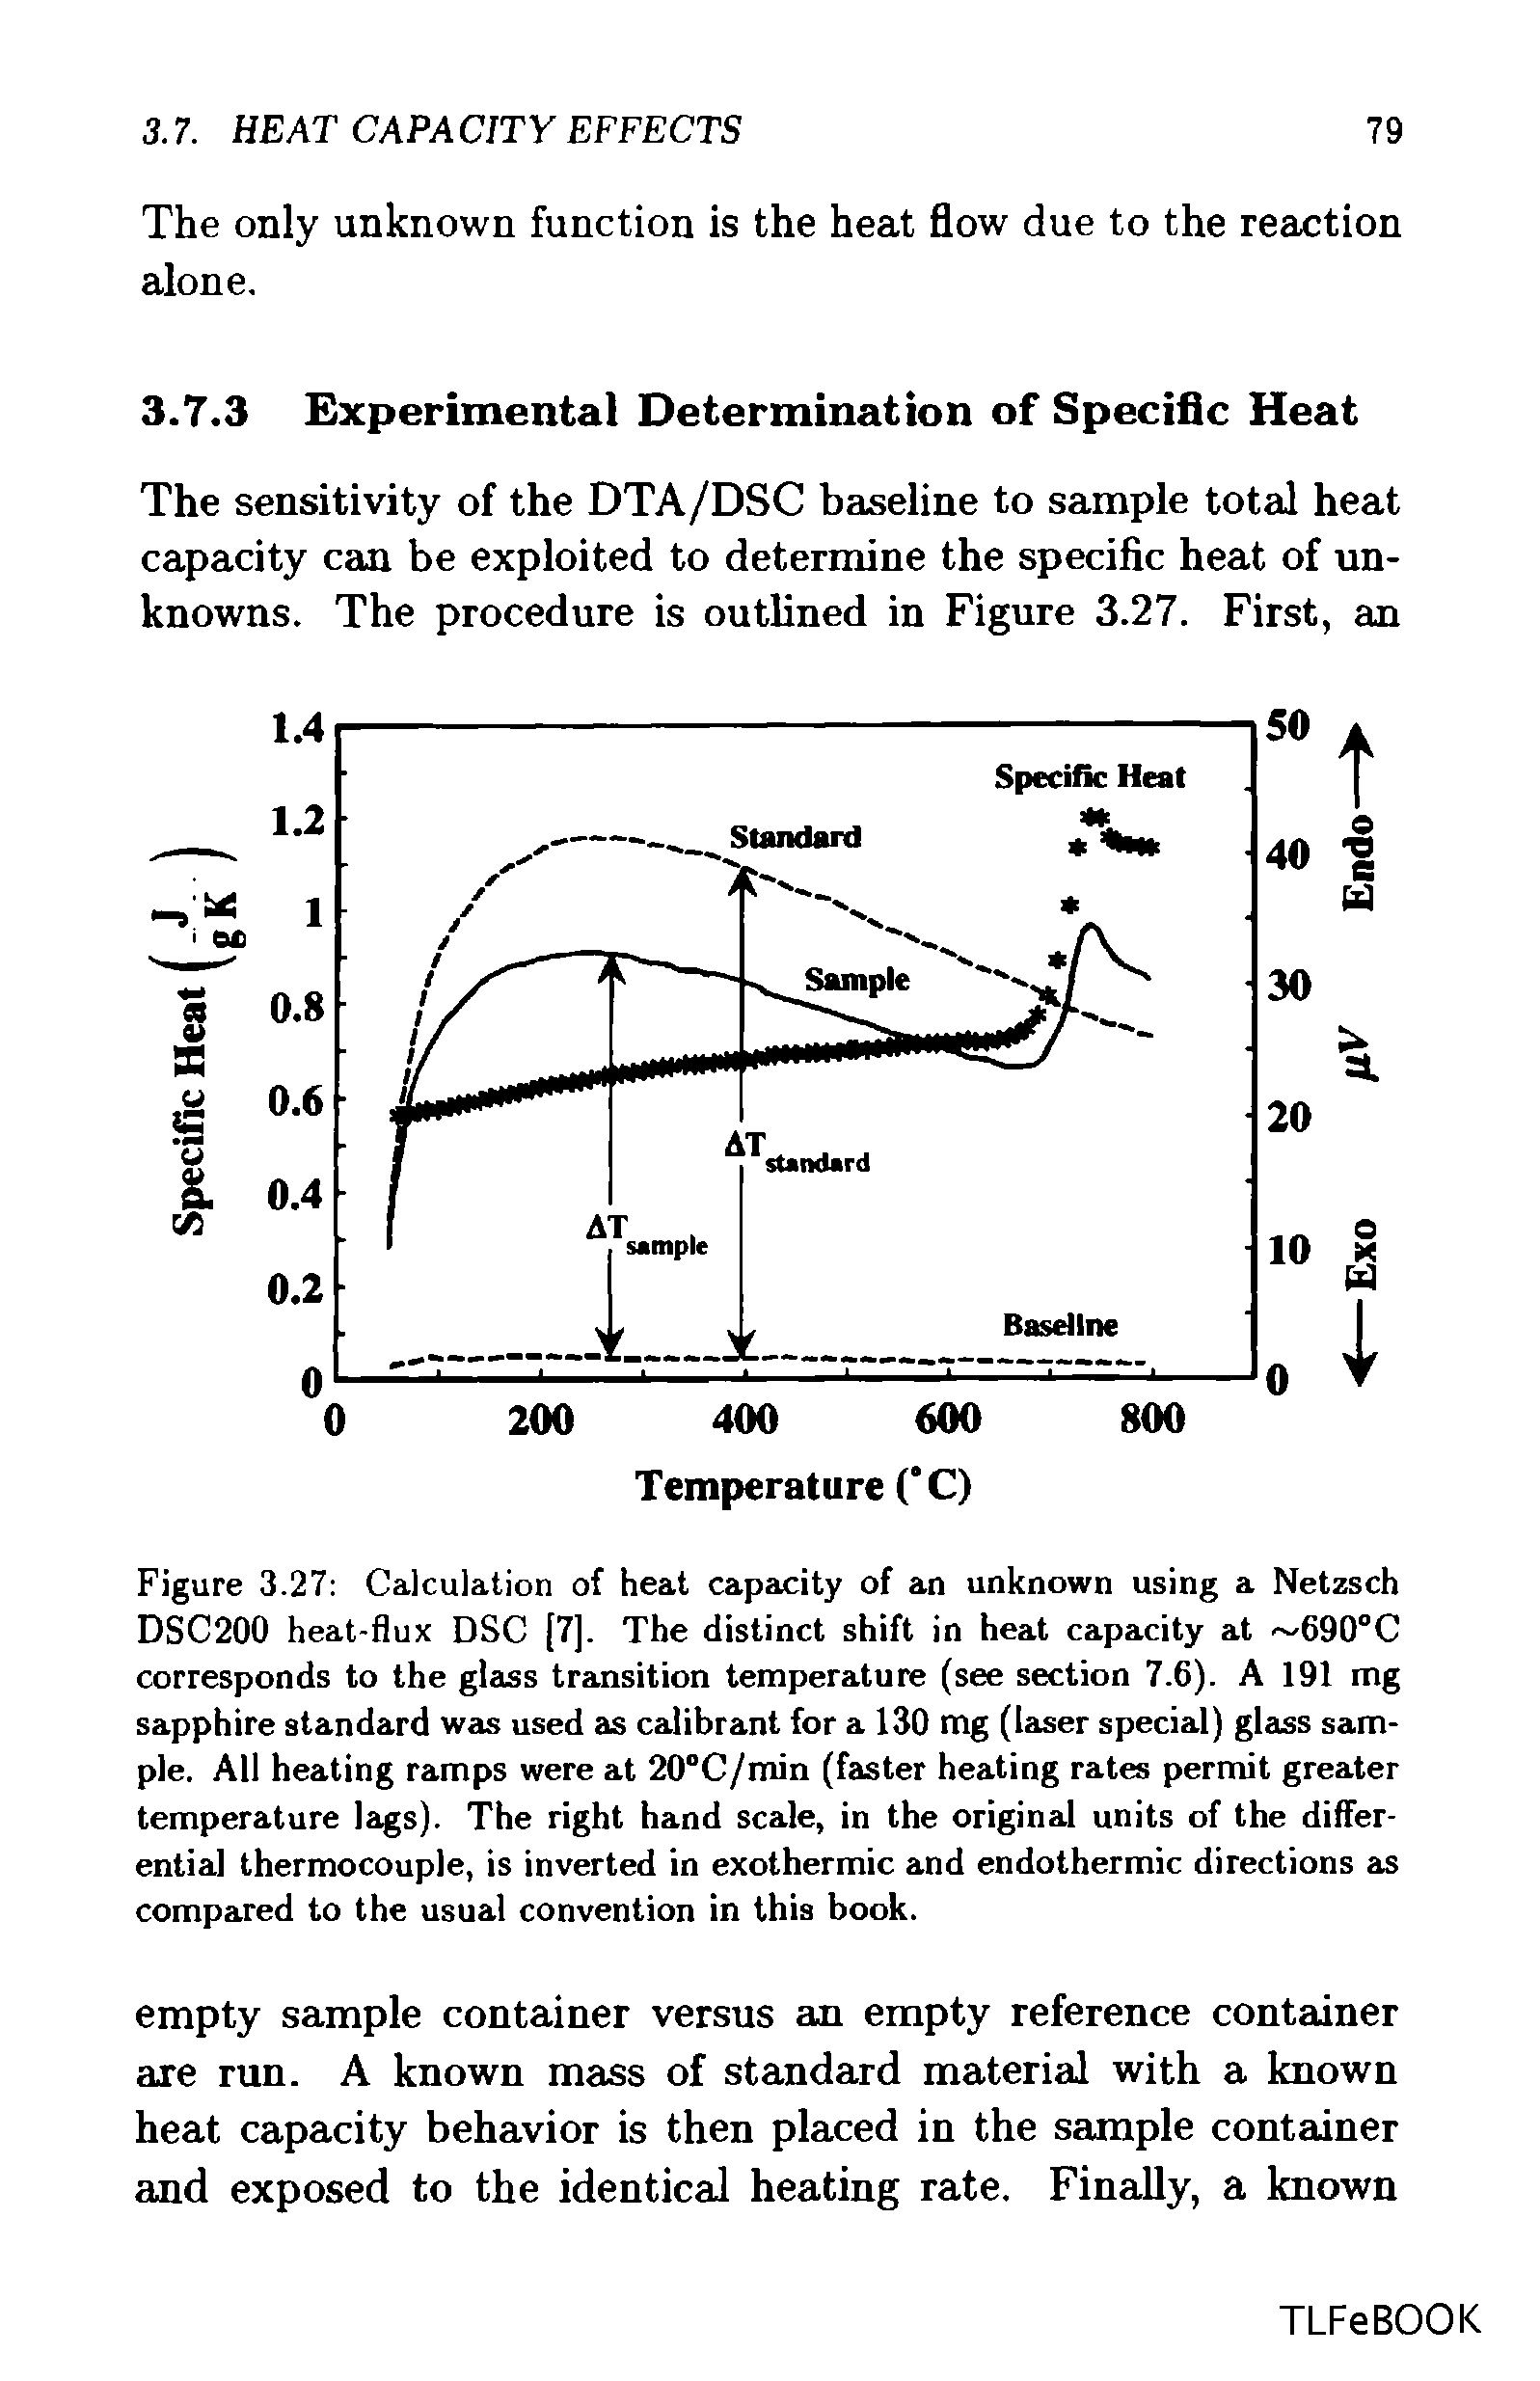 Figure 3.27 Calculation of heat capacity of an unknown using a Netzsch DSC200 heat-flux DSC [7]. The distinct shift in heat capacity at 690°C corresponds to the glass transition temperature (see section 7.6). A 191 mg sapphire standard was used as calibrant for a 130 mg (laser special) glass sample. All heating ramps were at 20°C/min (faster heating rates permit greater temperature lags). The right hand scale, in the original units of the differential thermocouple, is inverted in exothermic and endothermic directions as compared to the usual convention in this book.